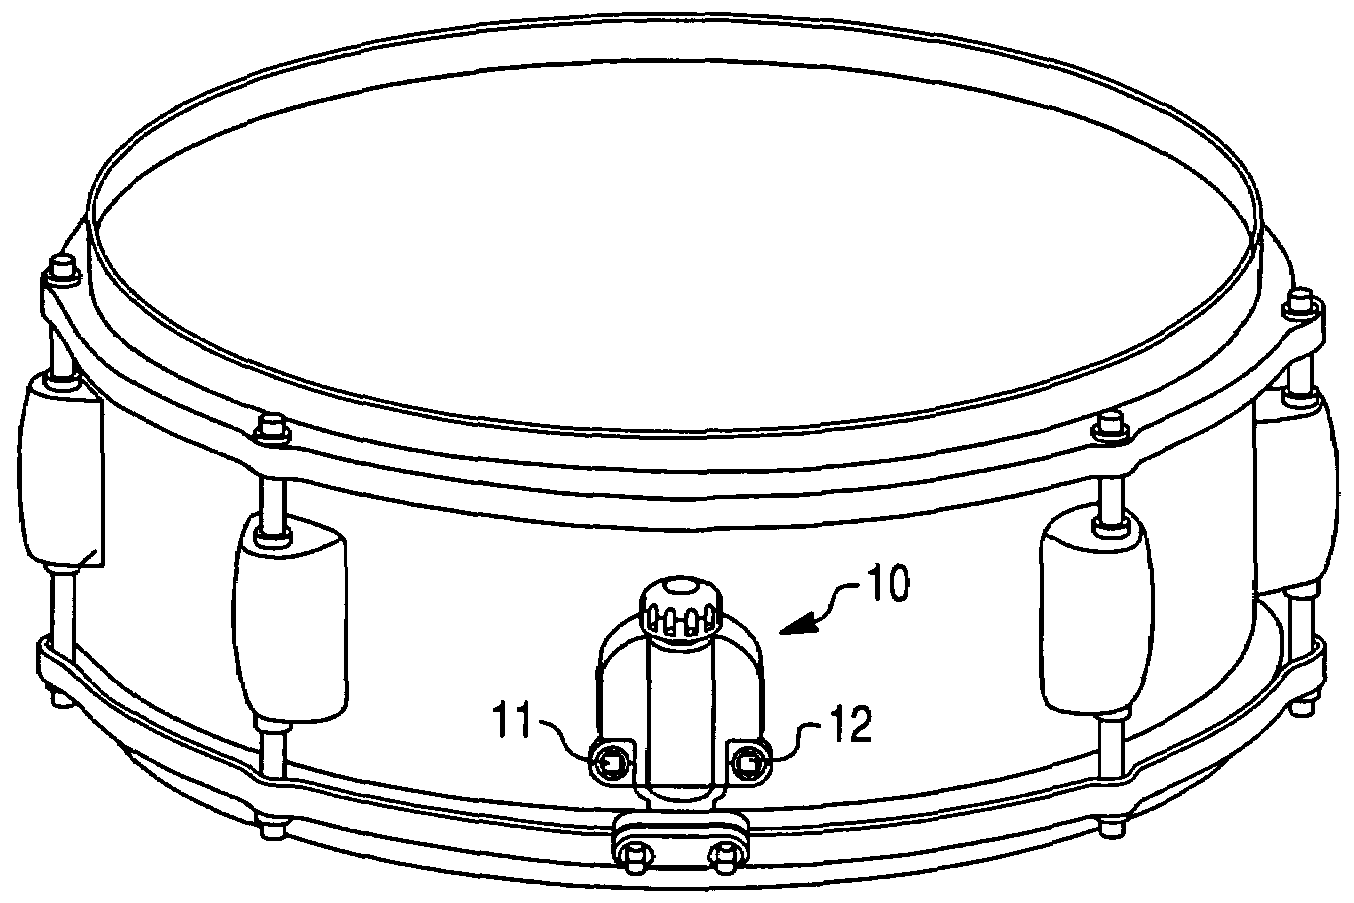 Snare tensioner for a snare drum